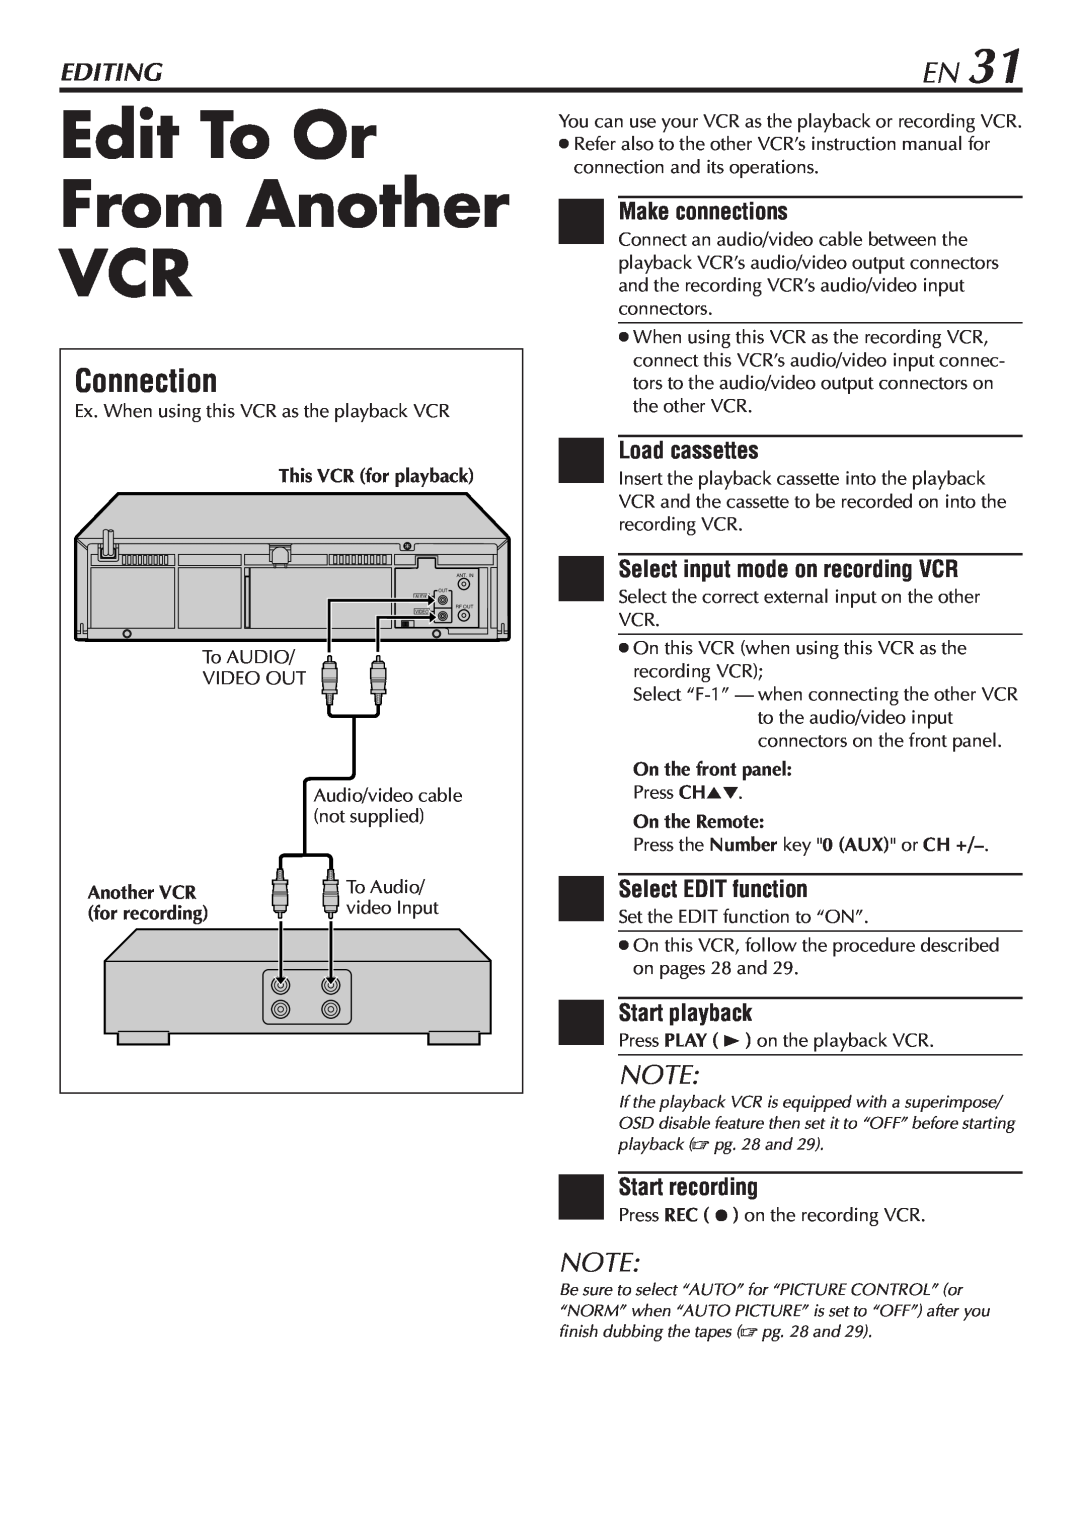 JVC HR-A47U Edit To Or From Another VCR, Connection, Editing, 1Make connections, Load cassettes, Select EDIT function 